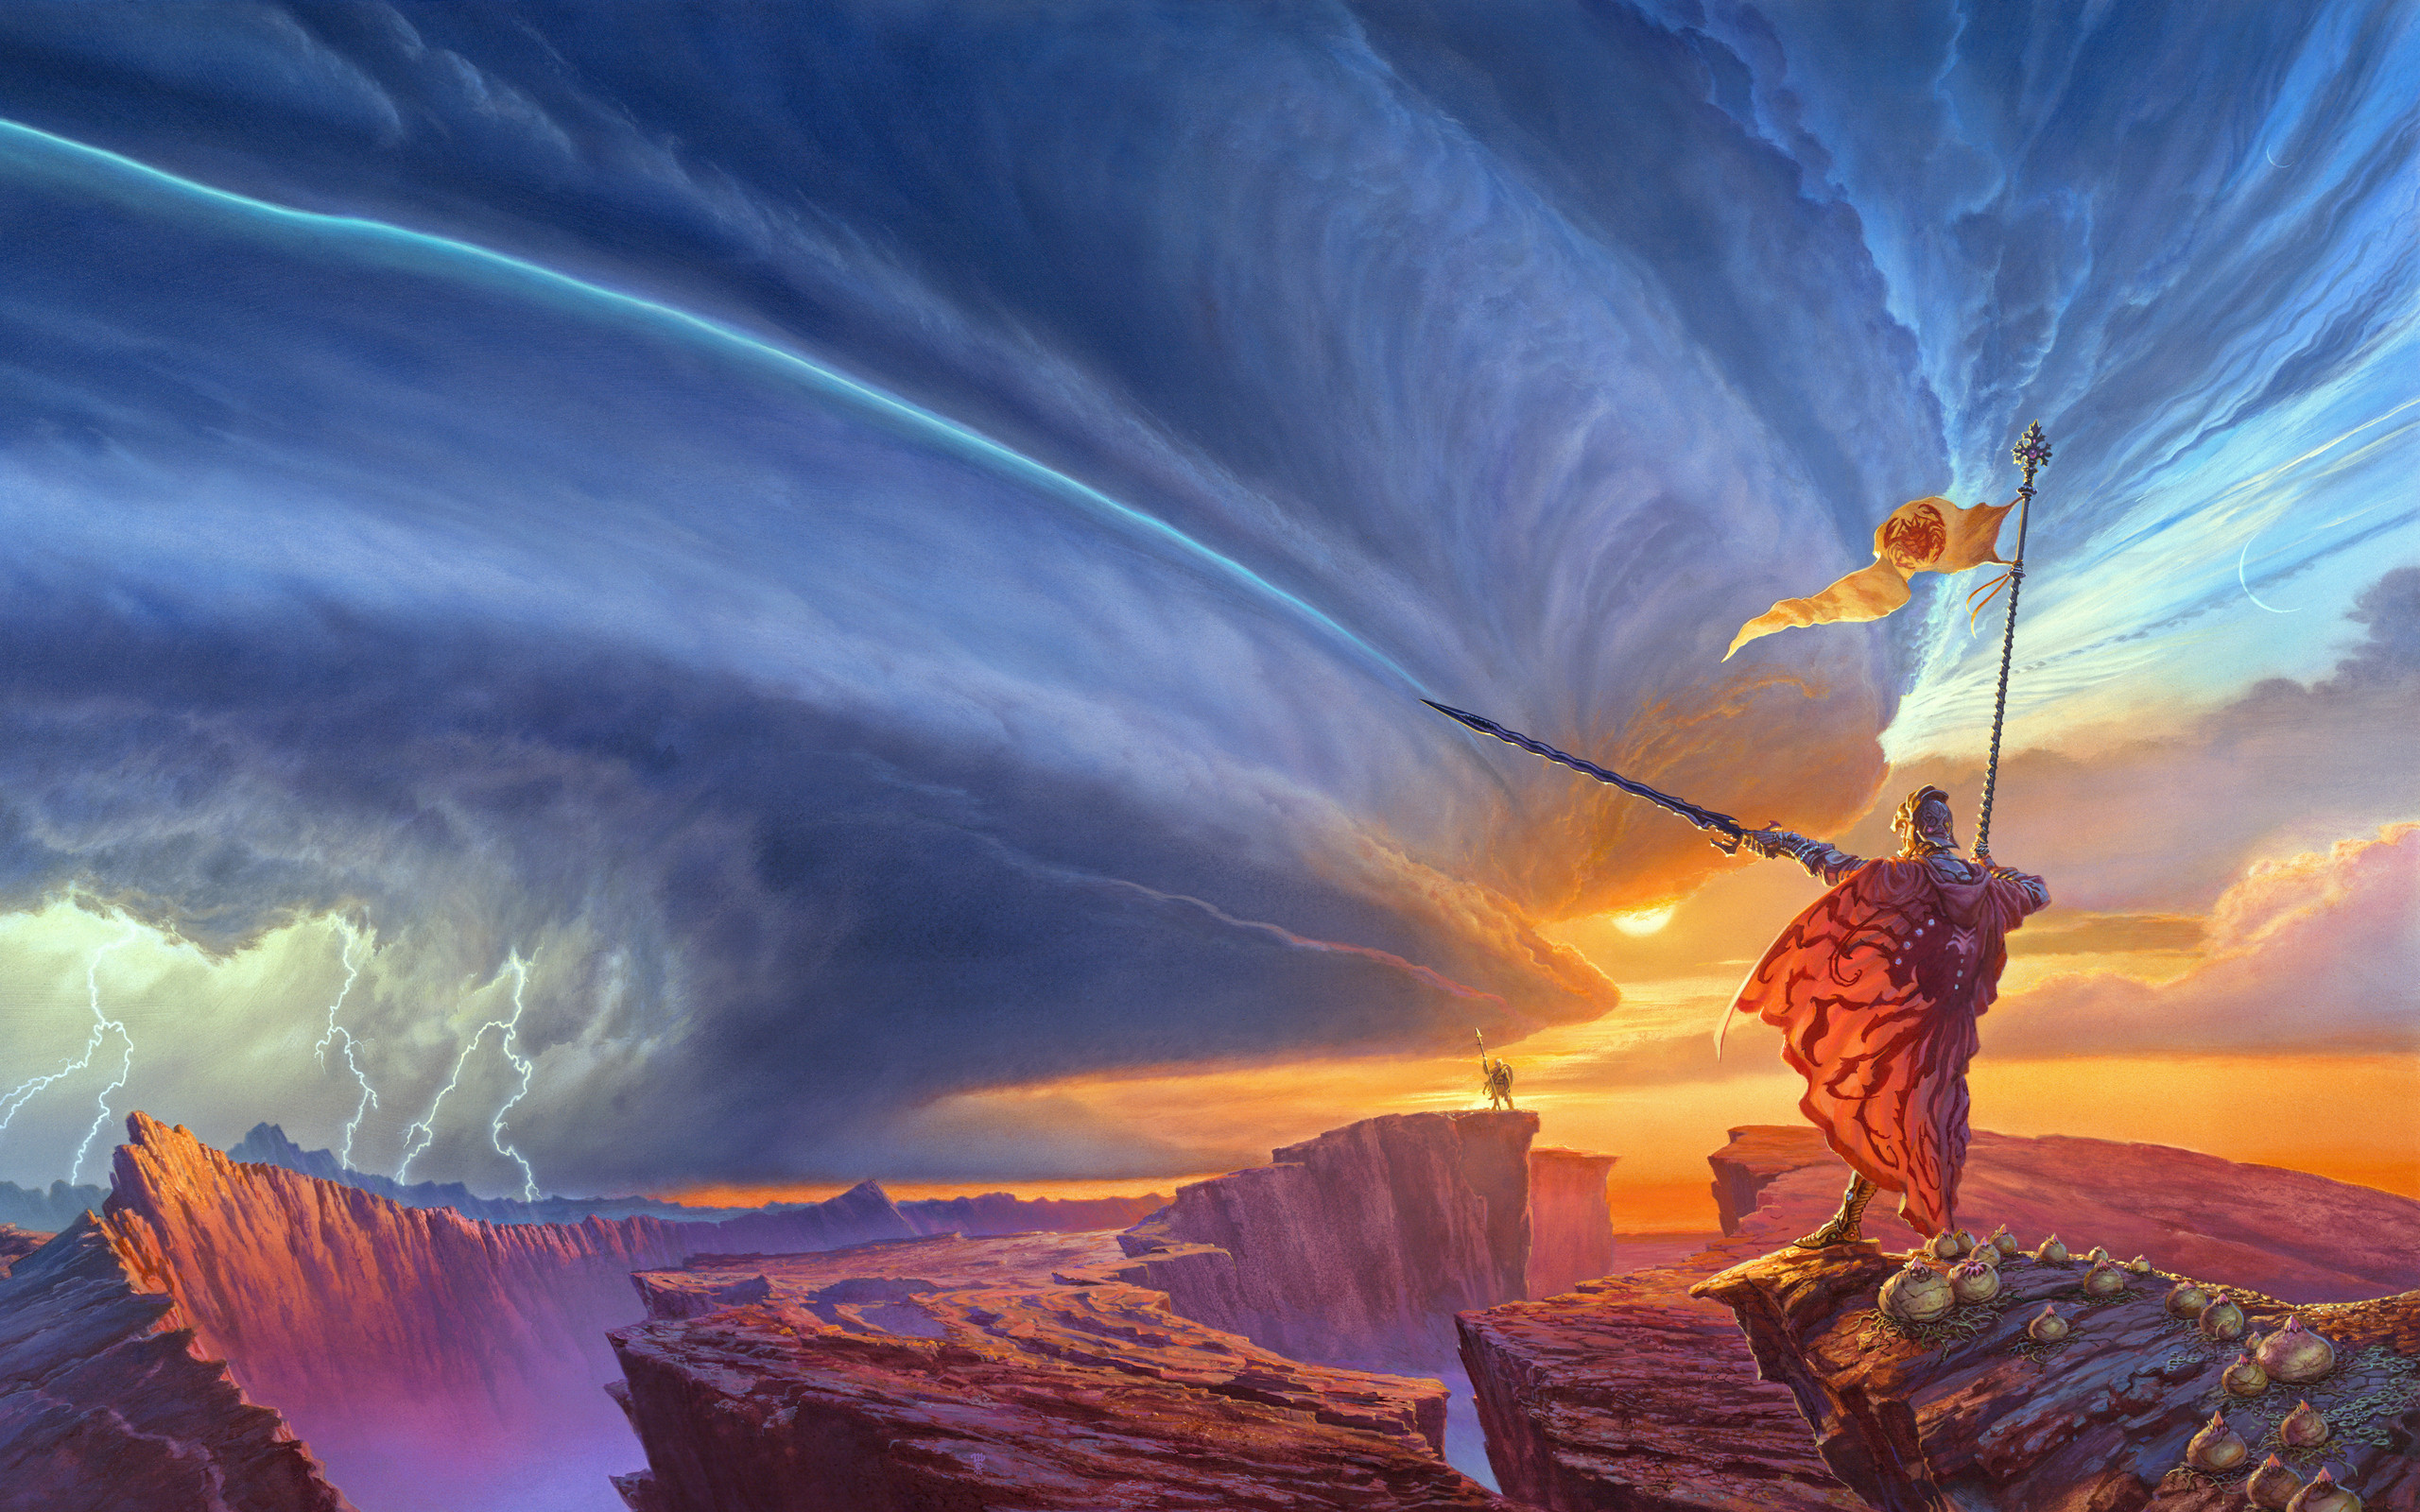 The cover art of The Way of Kings, featuring the shattered plains